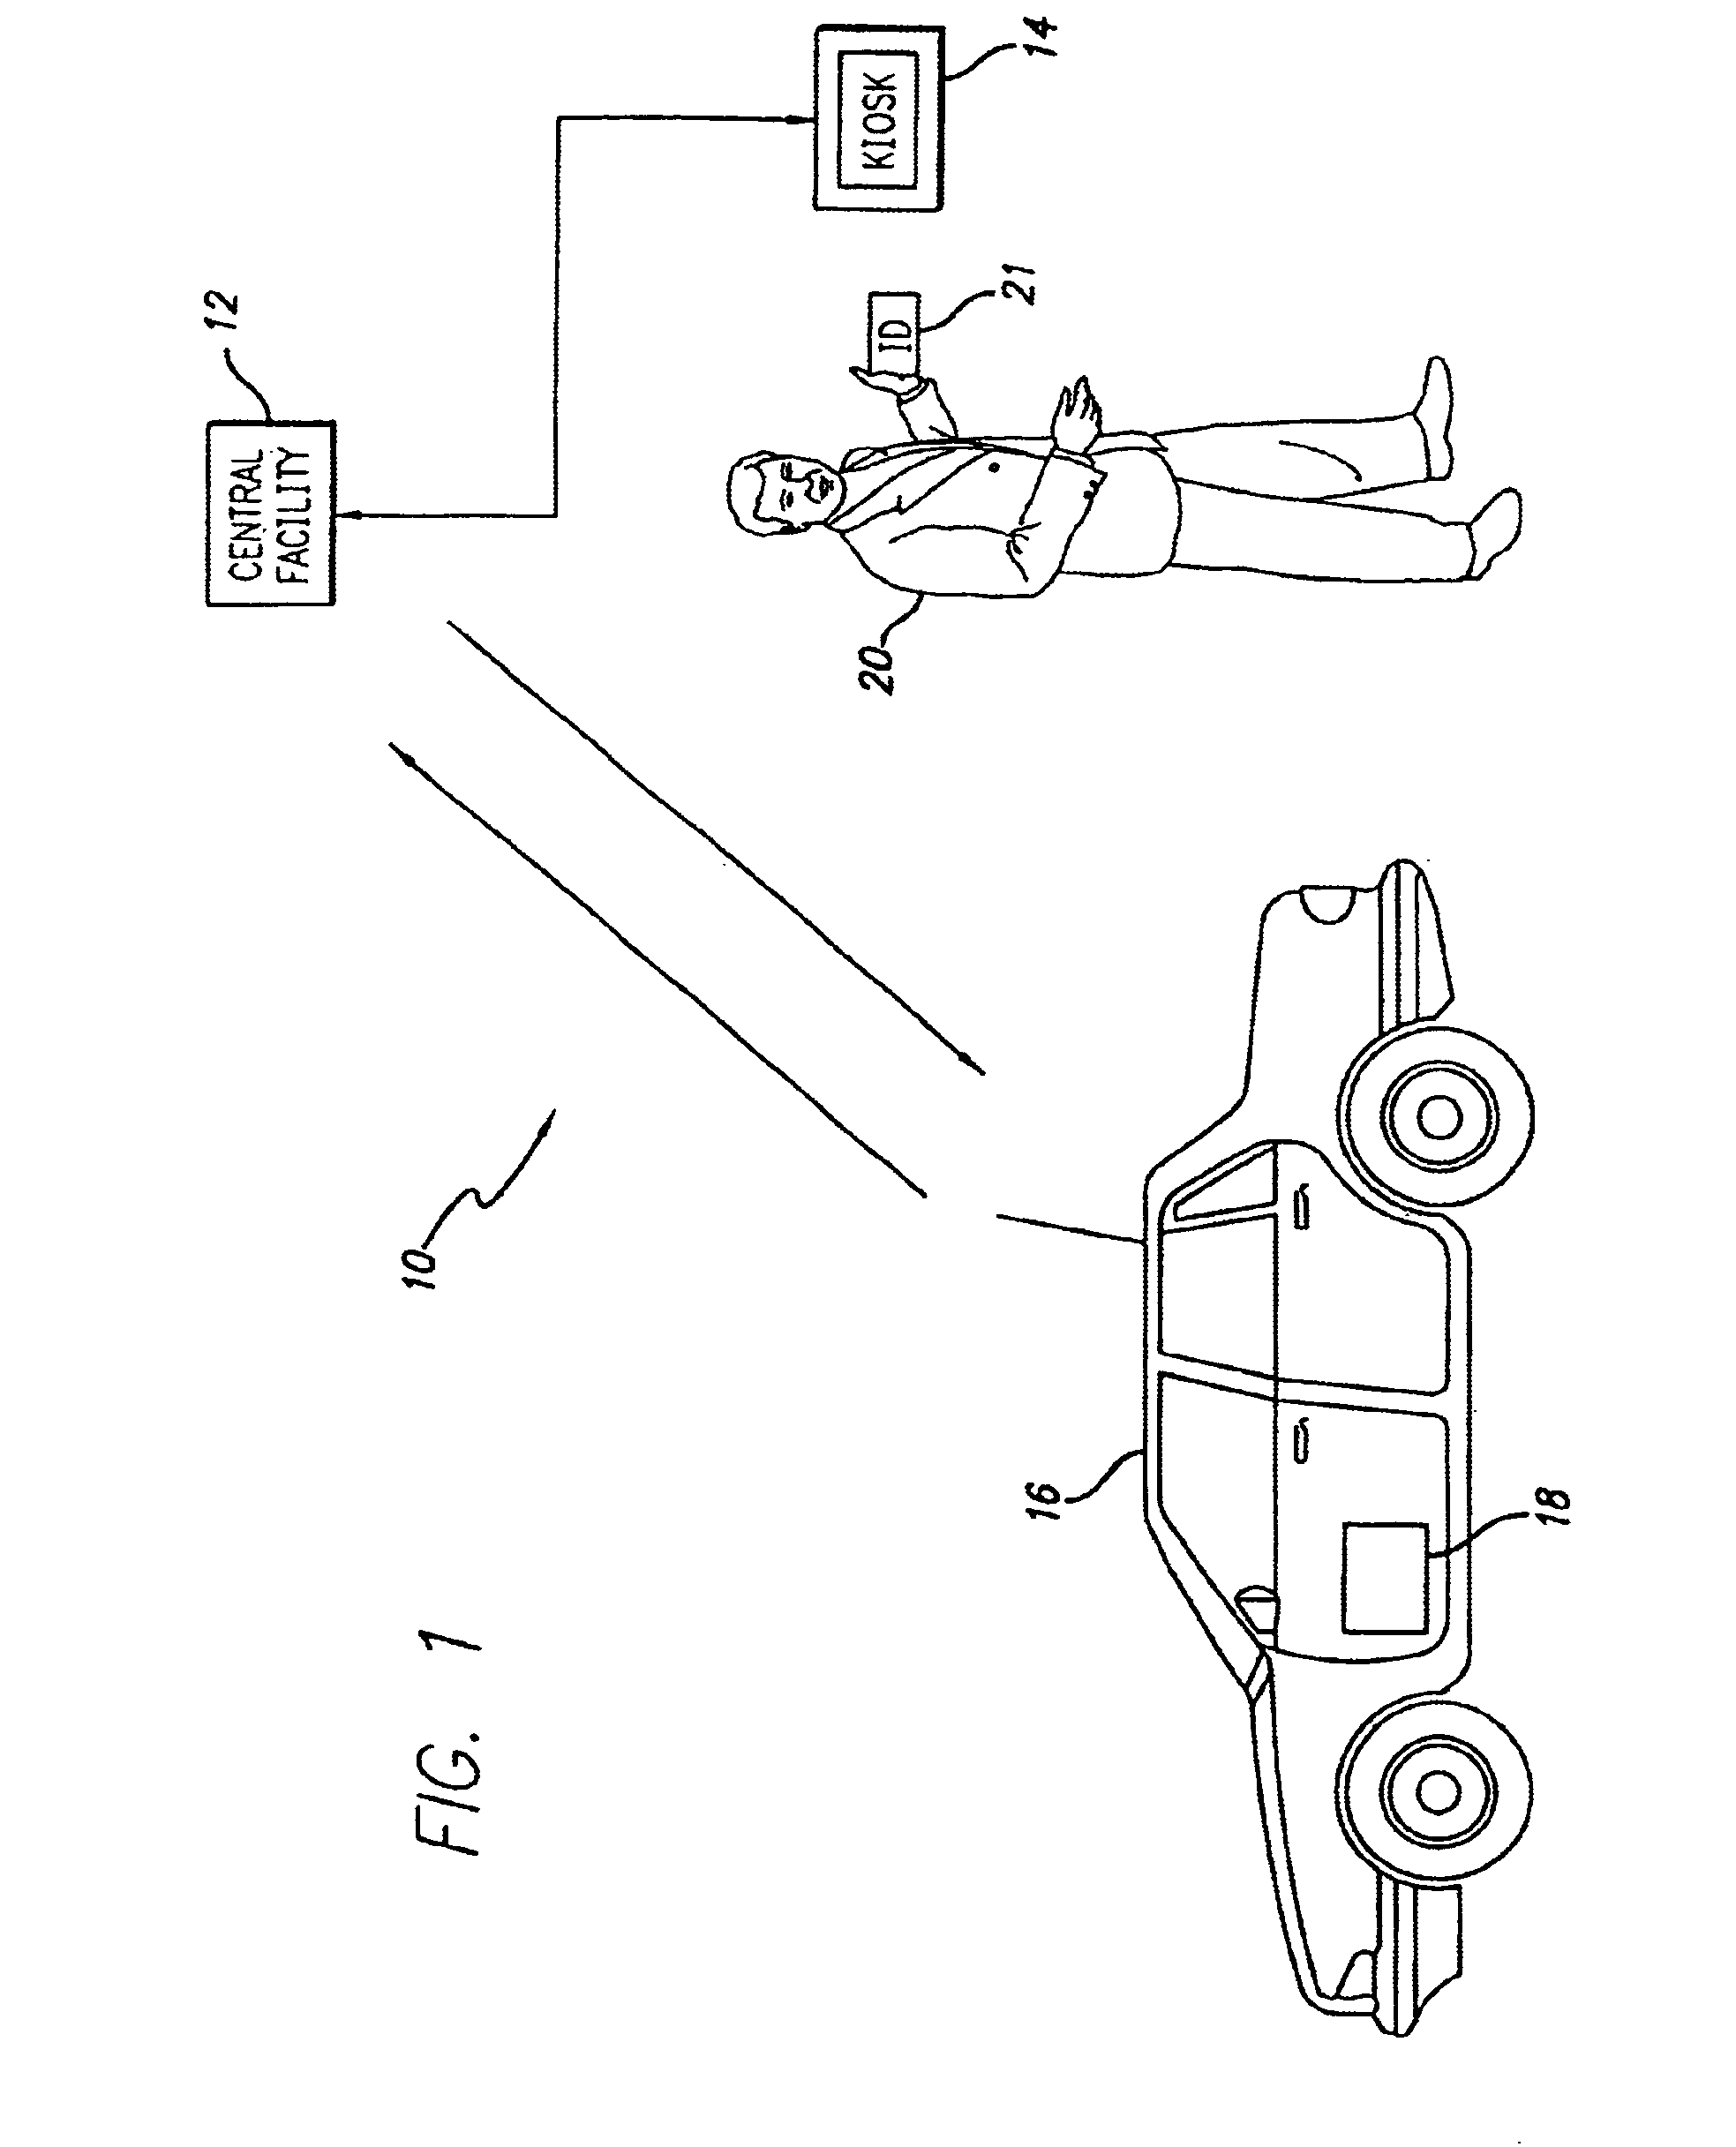 Shared vehicle system and method with vehicle relocation